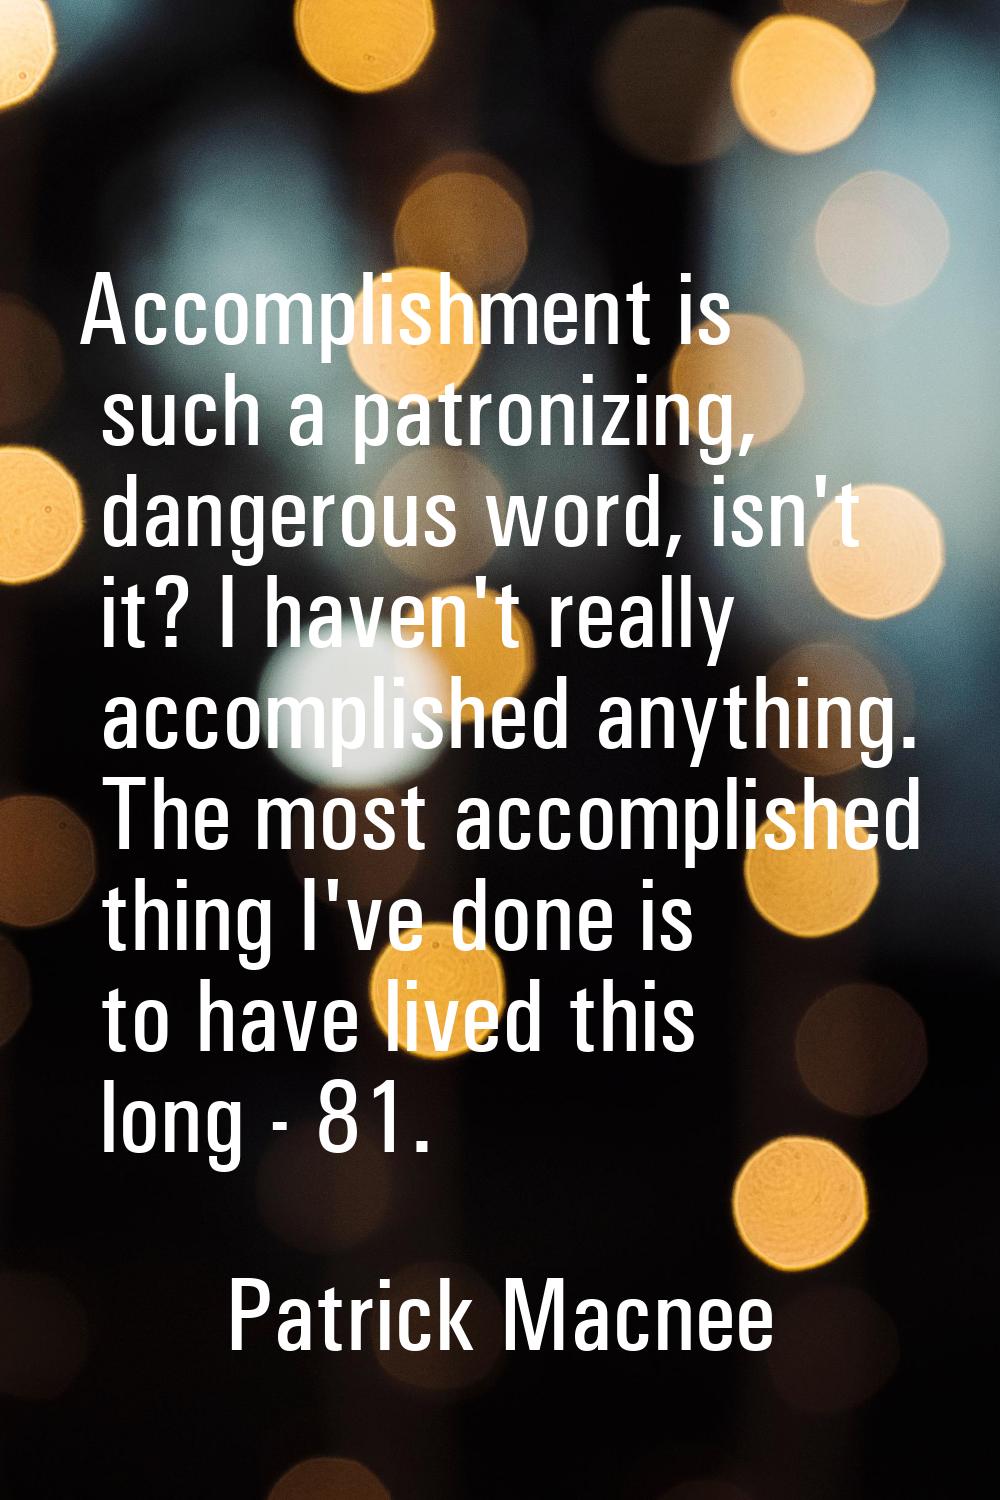 Accomplishment is such a patronizing, dangerous word, isn't it? I haven't really accomplished anyth